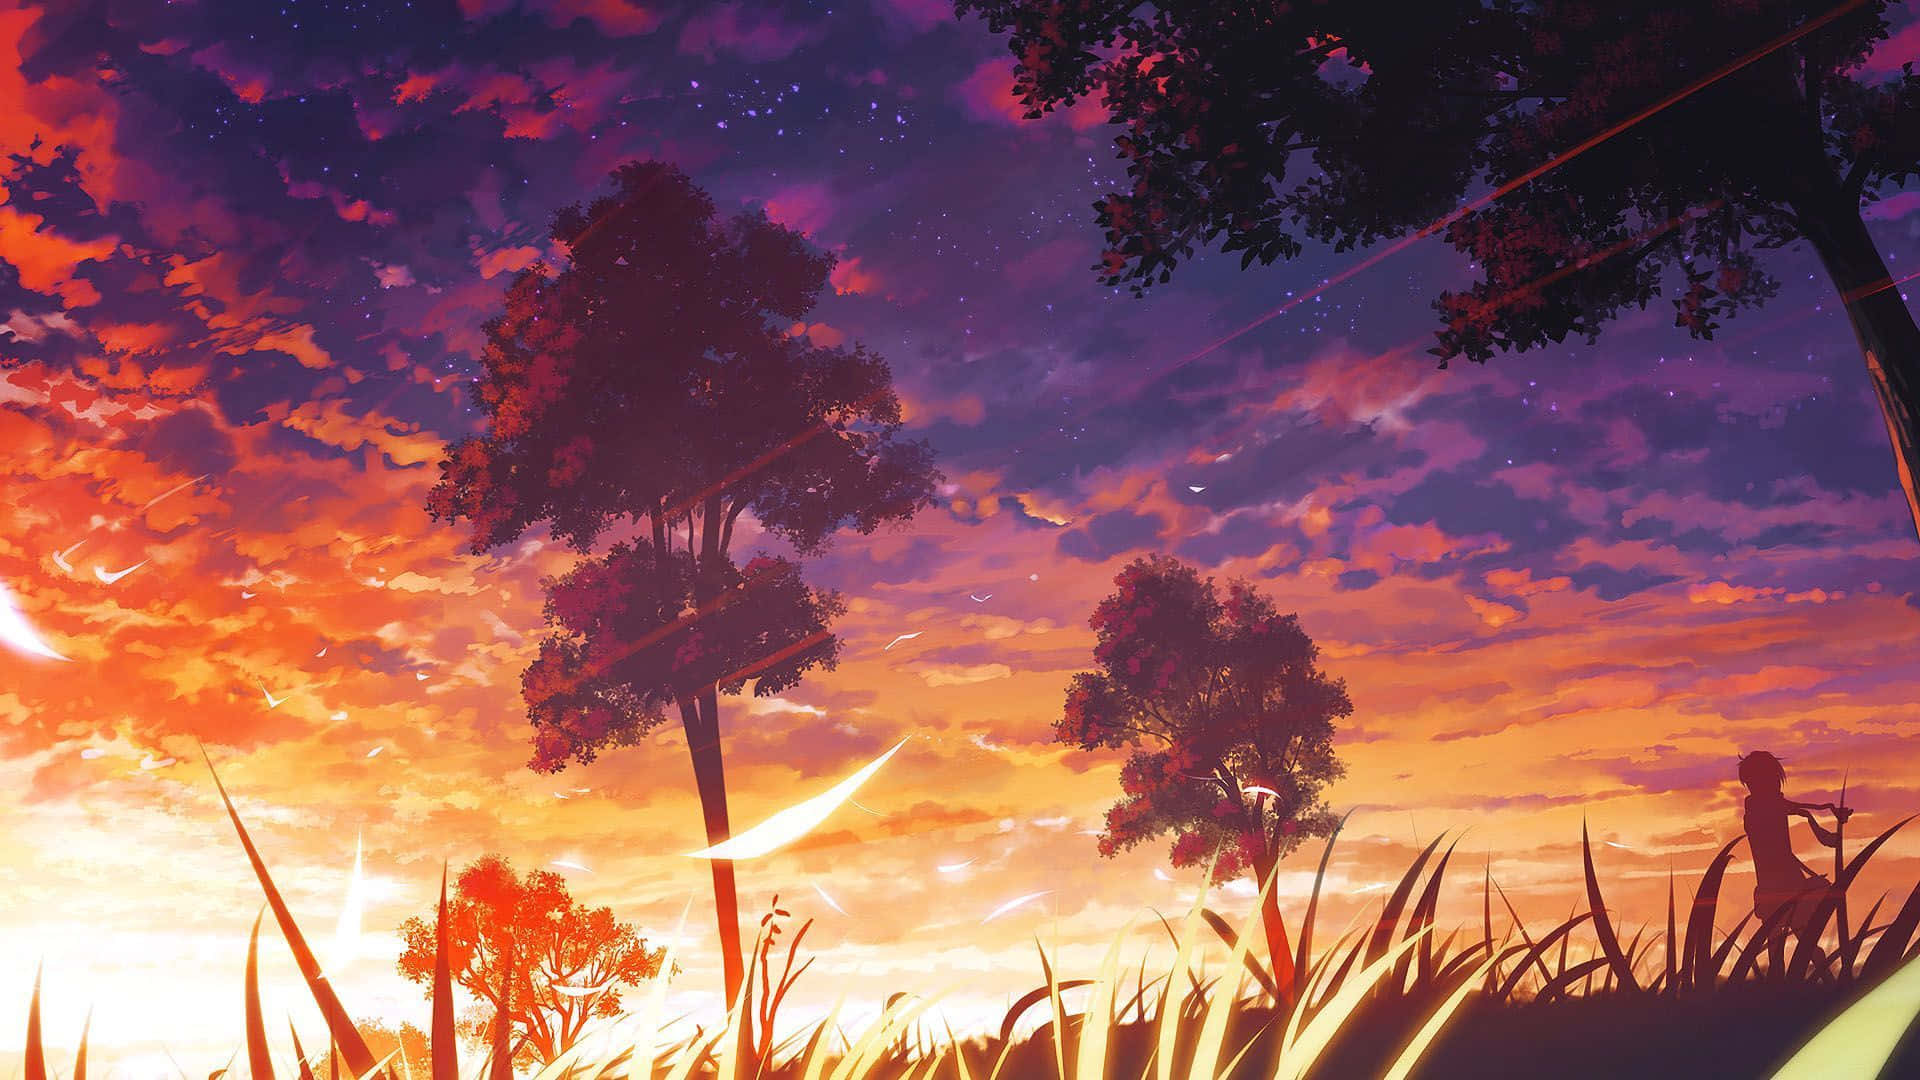 A breathtaking Anime sunset creating a magical skyline in a vividly colorful world.